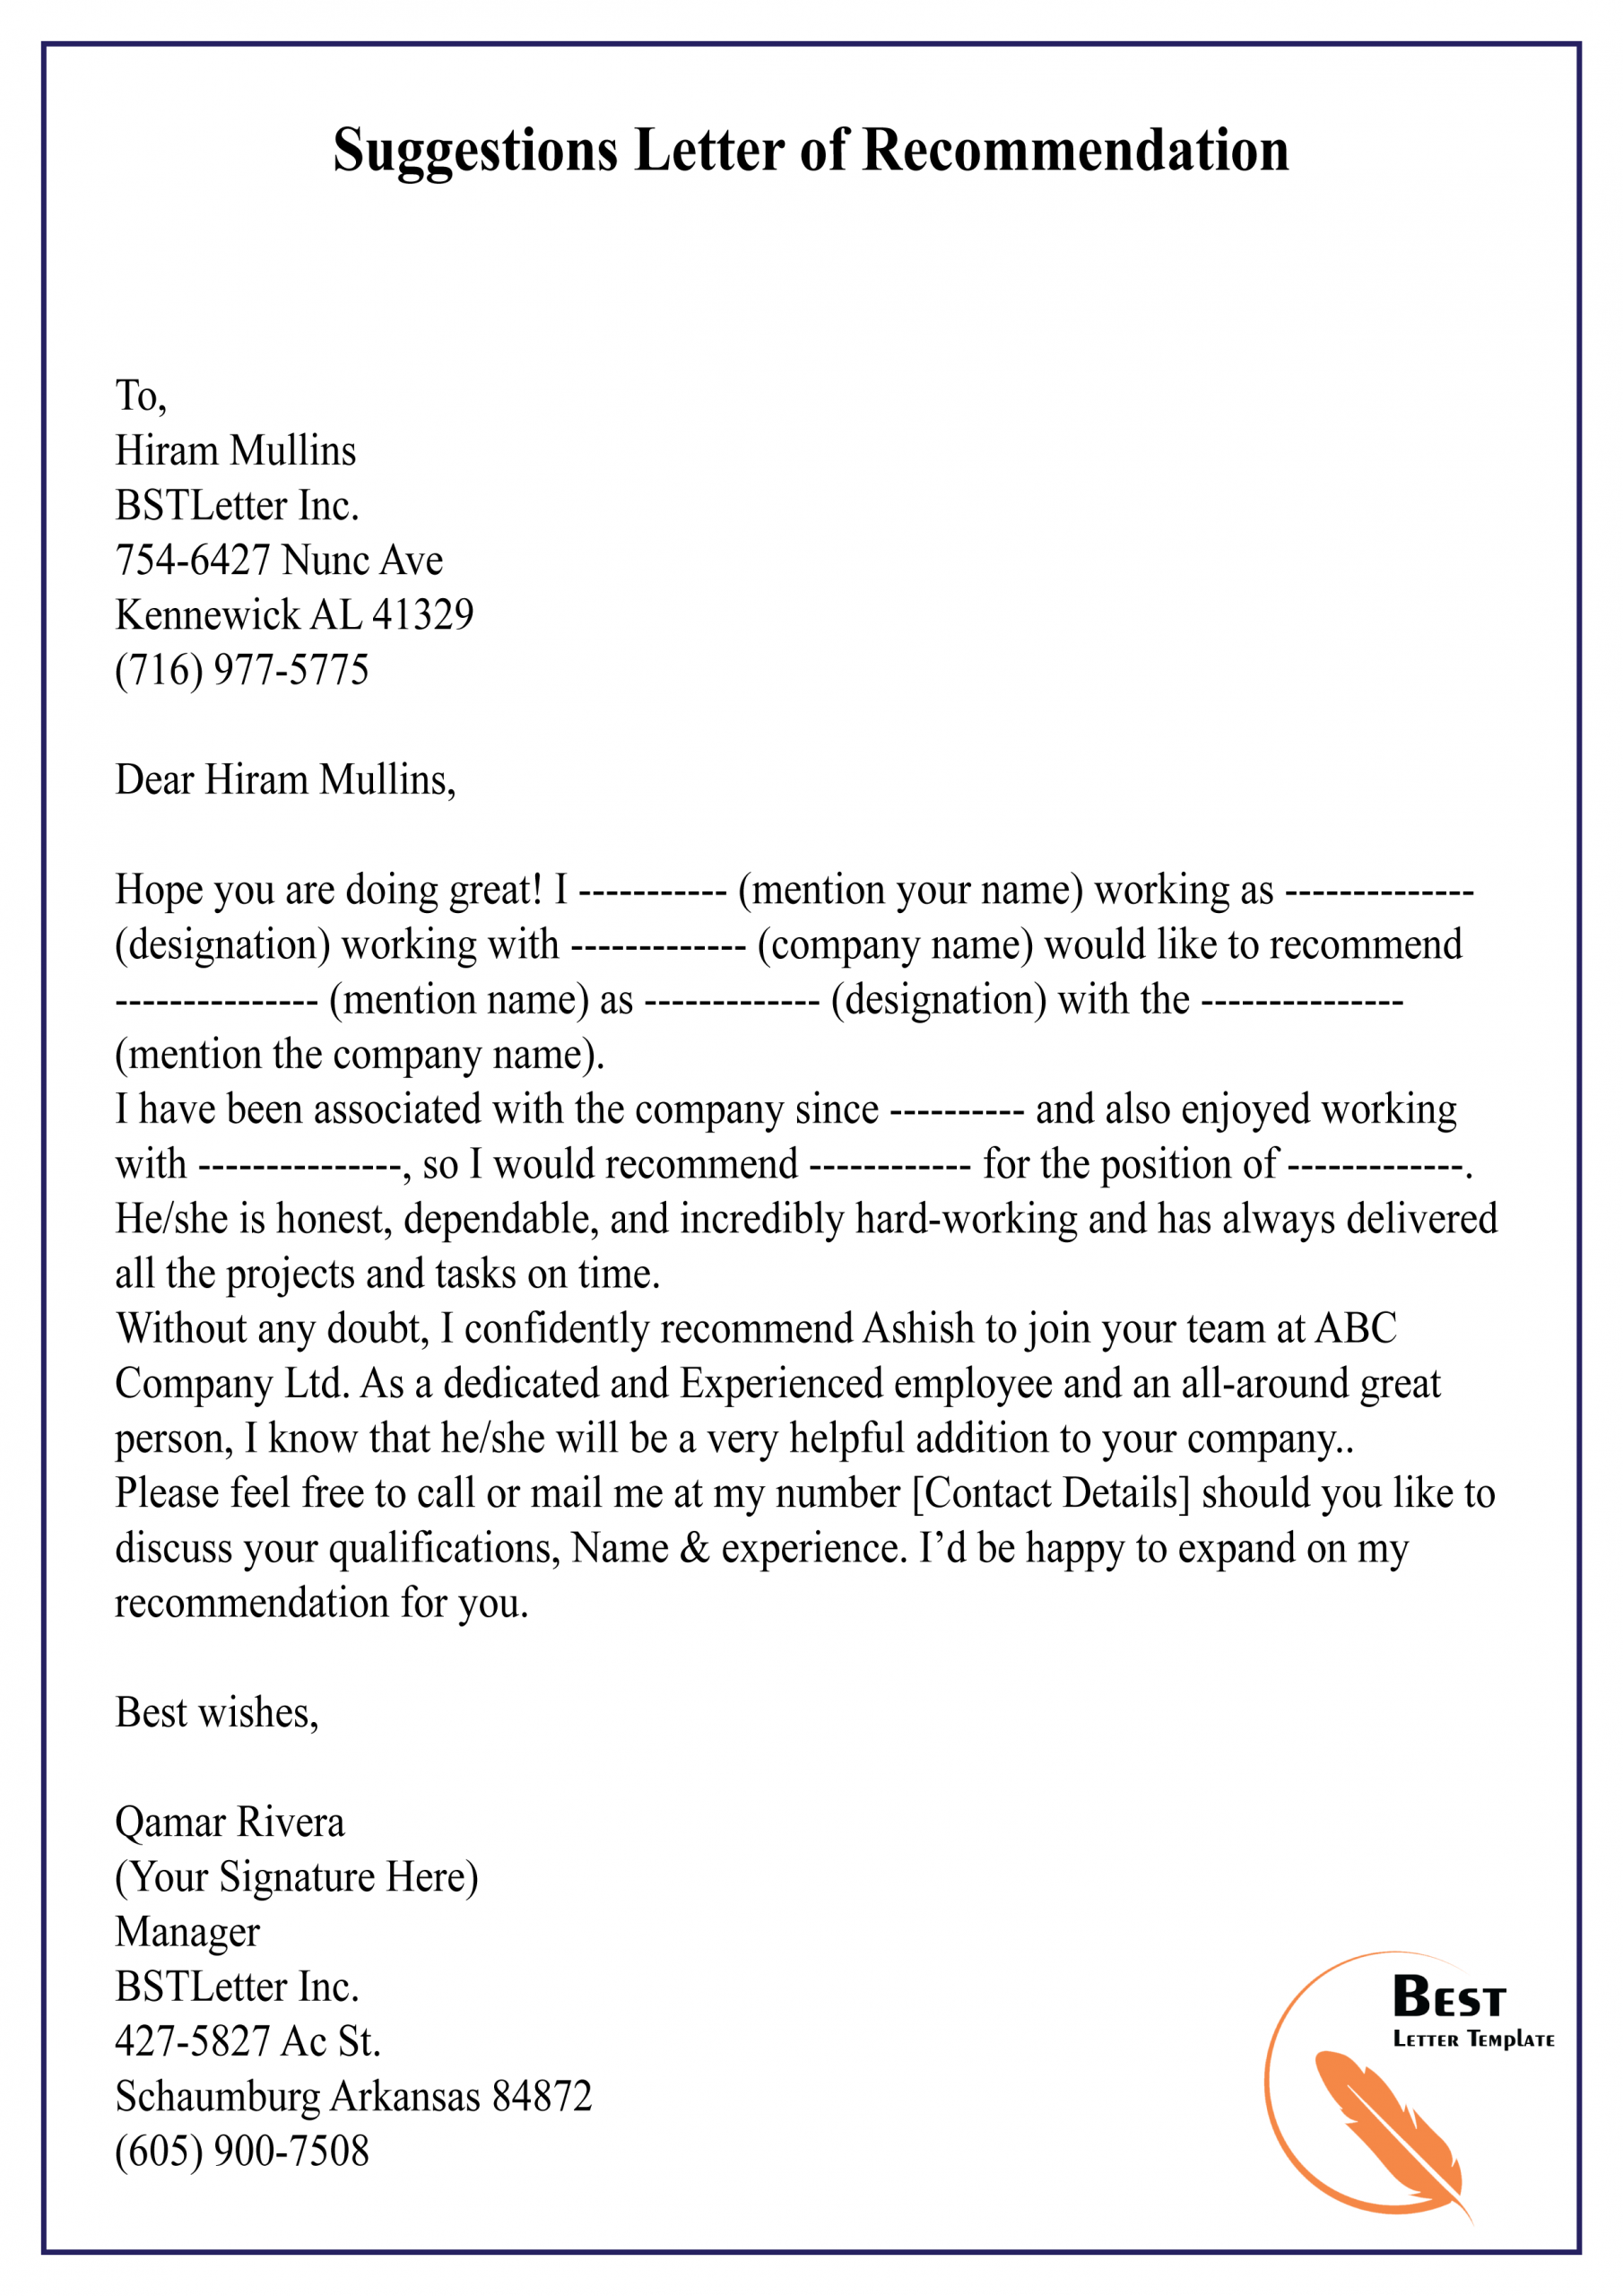 Suggestions Letter Of Recommendation 01 Best Letter Template pertaining to dimensions 2480 X 3508